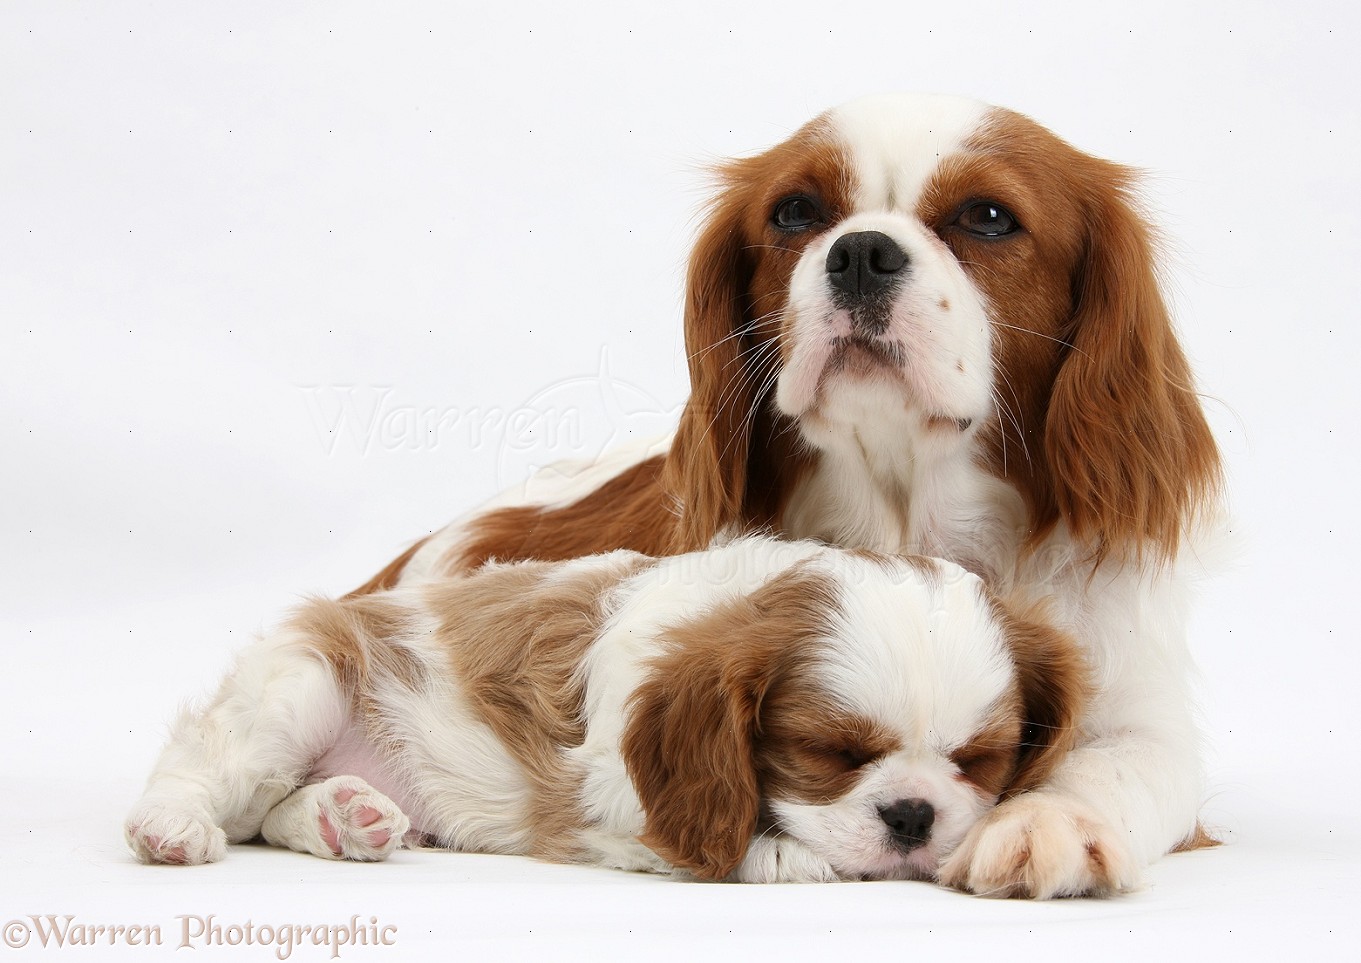 Dogs Blenheim Cavalier King Charles Spaniel mother and